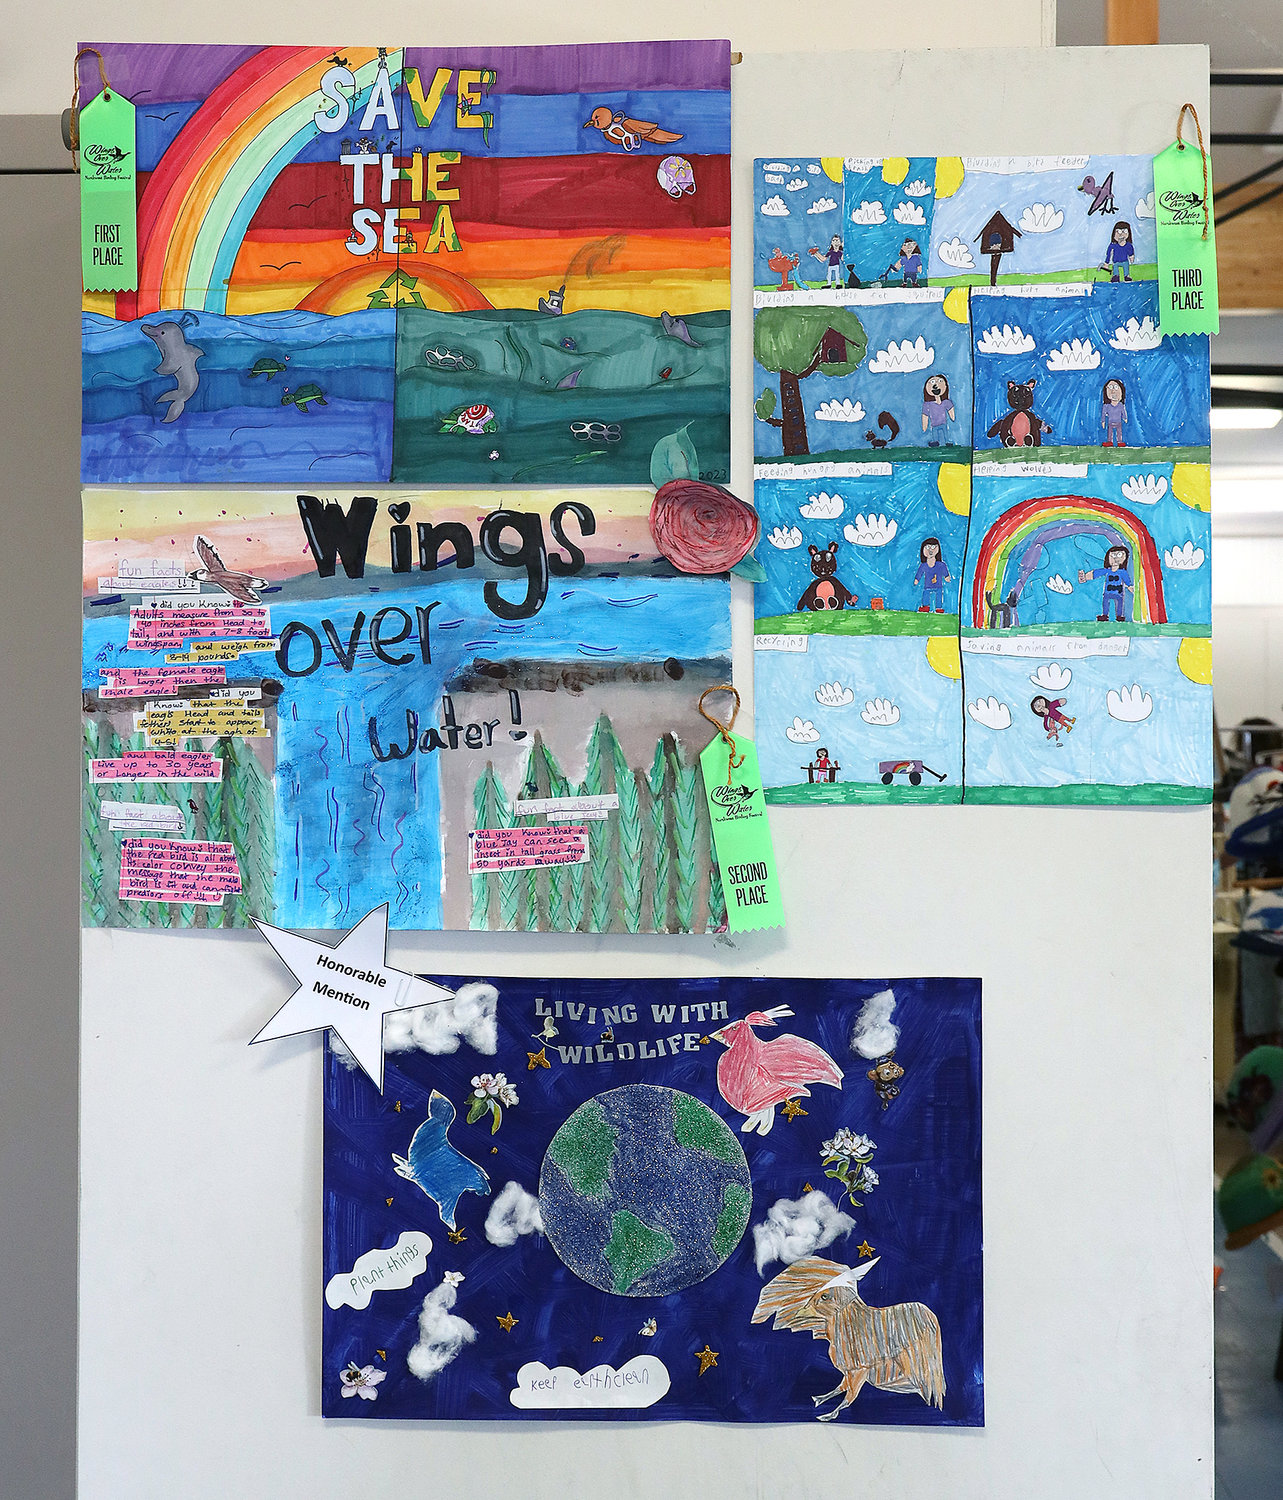 Four Blaine Elementary School students were awarded for their artwork at the Wings Over Water Northwest Birding Festival March 17-19. Counterclockwise; fifth grader Avery Morecombe won first place; fifth grader Nevaeh Denning won second place; third grader Tristin Robertson received an honorable mention; and fourth grader Alysa Sheets won second place. Prizes included books, a $20 Edaleen Dairy gift certificate, $30 Westside Pizza gift certificate and season pass to Birch Bay Waterslides.